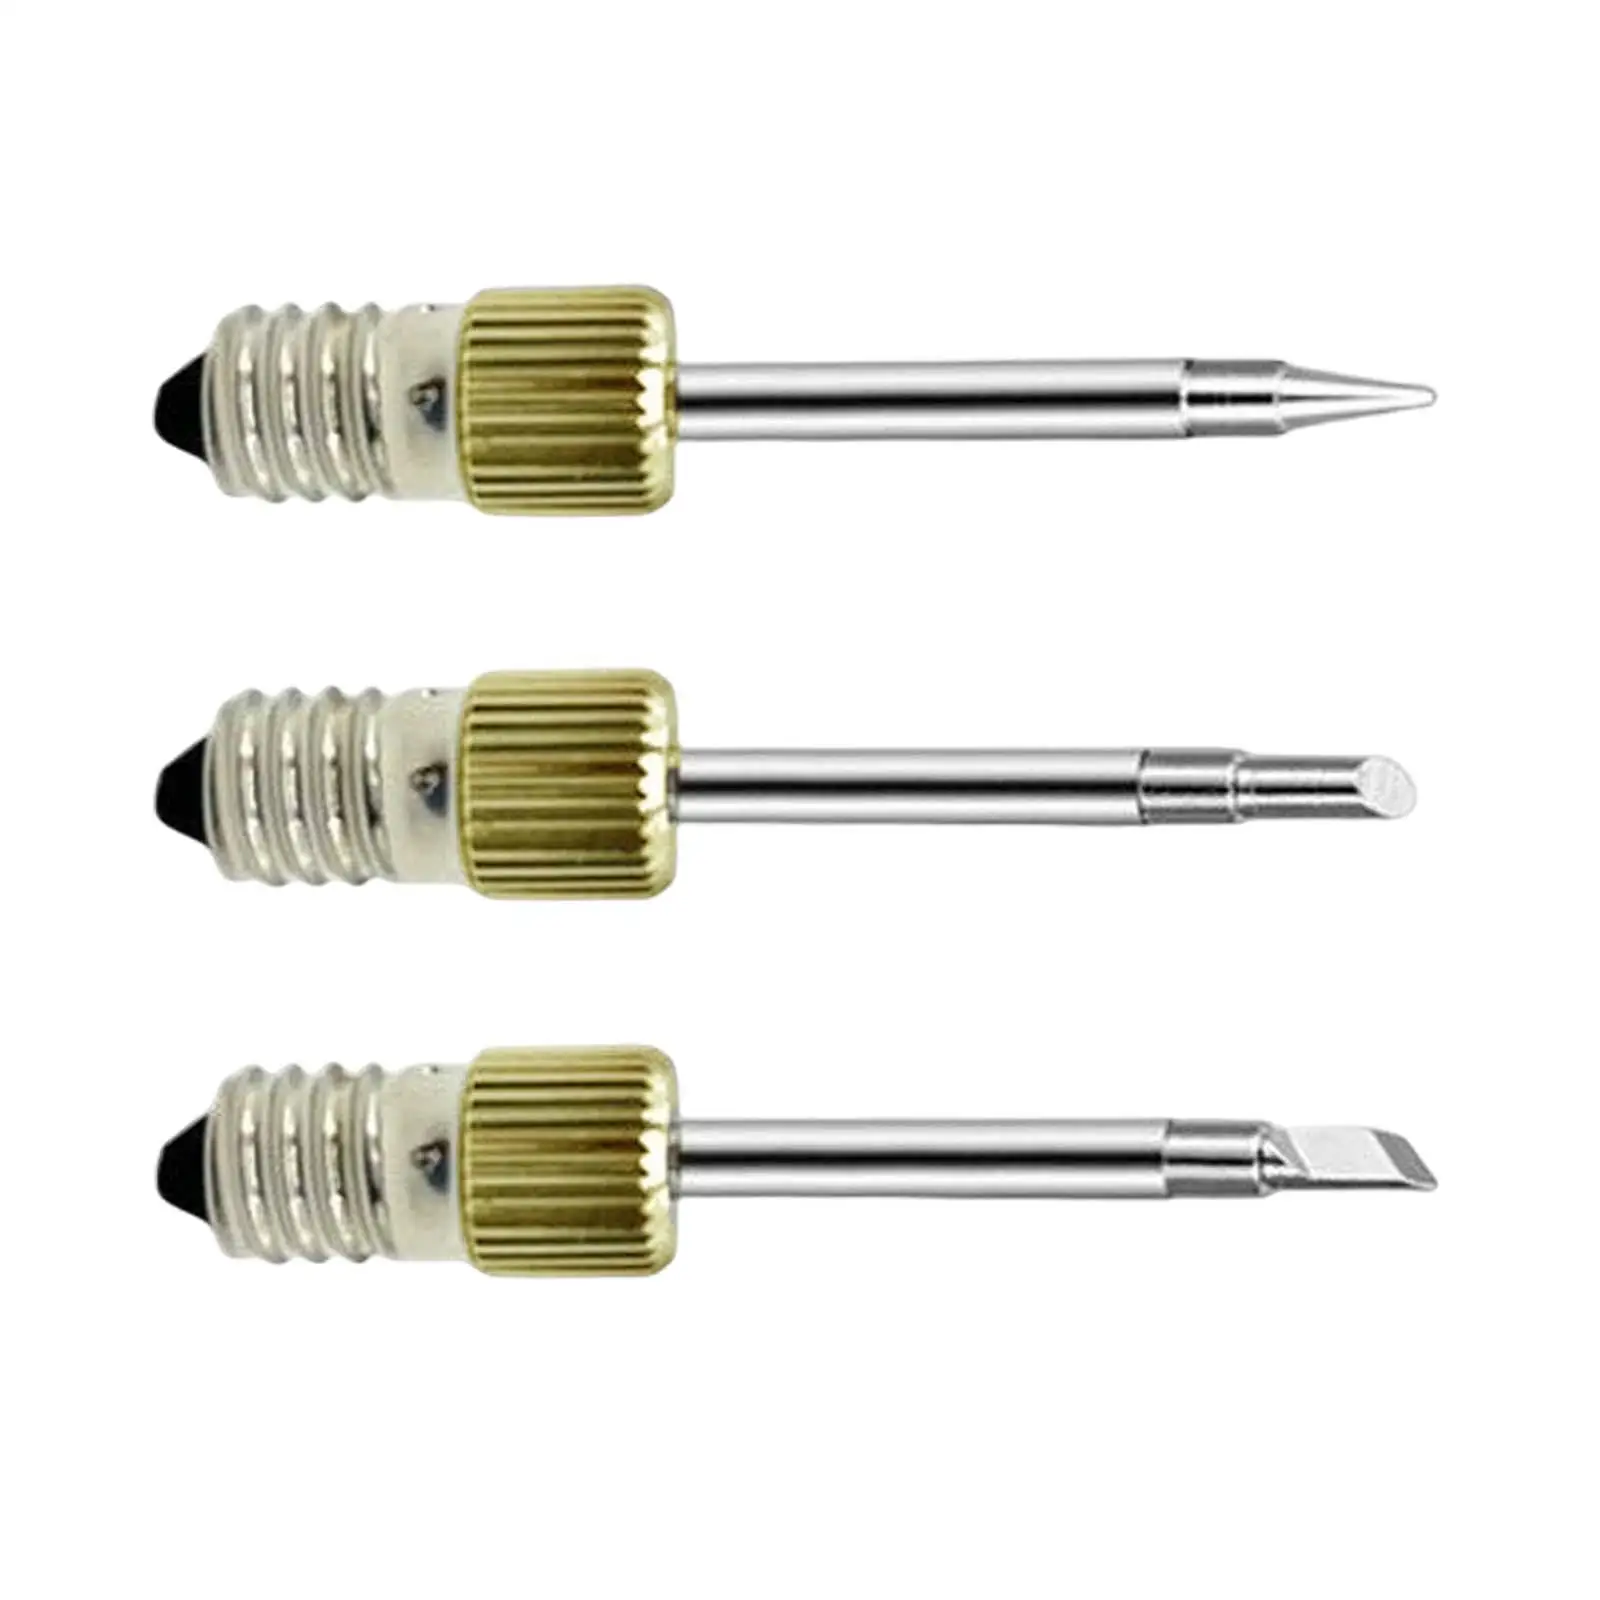 3 Pieces Electric Soldering Iron Tips Replacement E10 Interface Components Needle Tips Tool Steel solder for Repair Welding